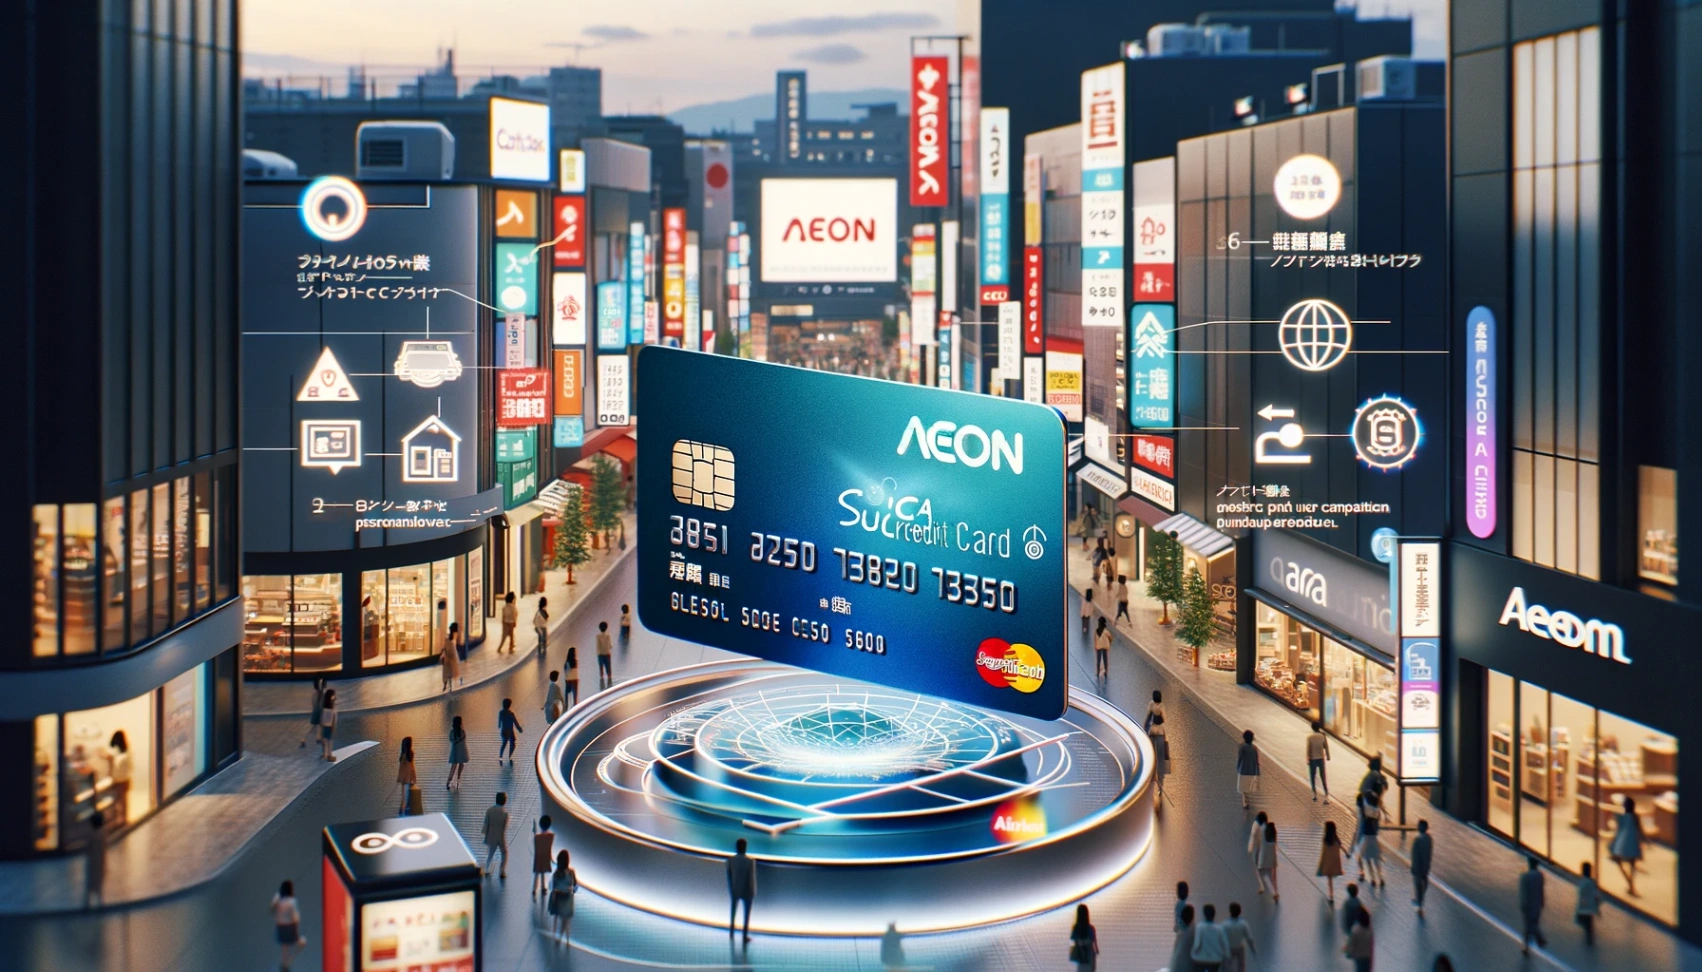 Aeon Suica Credit Card - Learn How to Apply Online